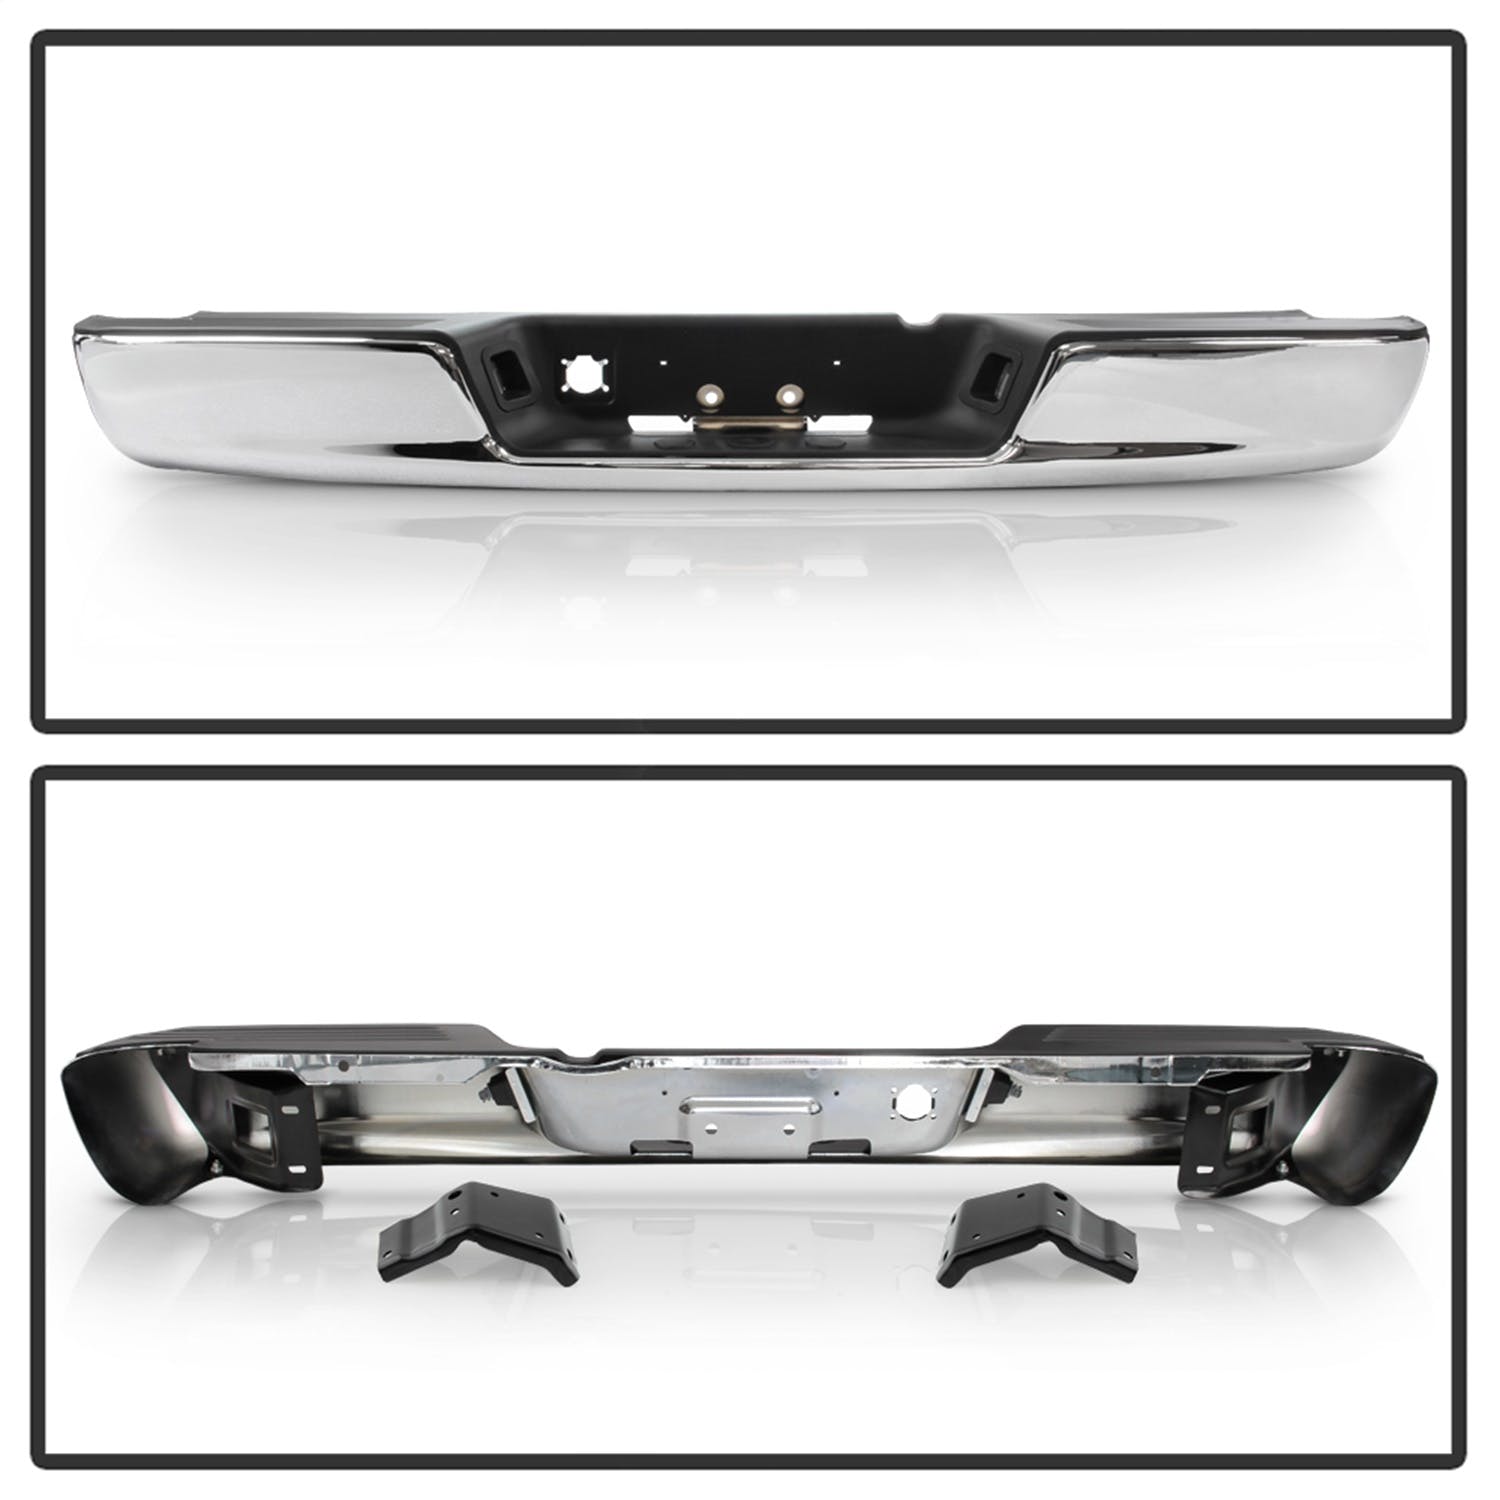 XTUNE POWER 9047367 Dodge Ram 1500 02 08 Ram 2500 3500 03 09 OEM Style Steel Rear Bumper Chrome ( Brackets Hardware And Step Pads Included ) ( Partslink: CH1103111 )